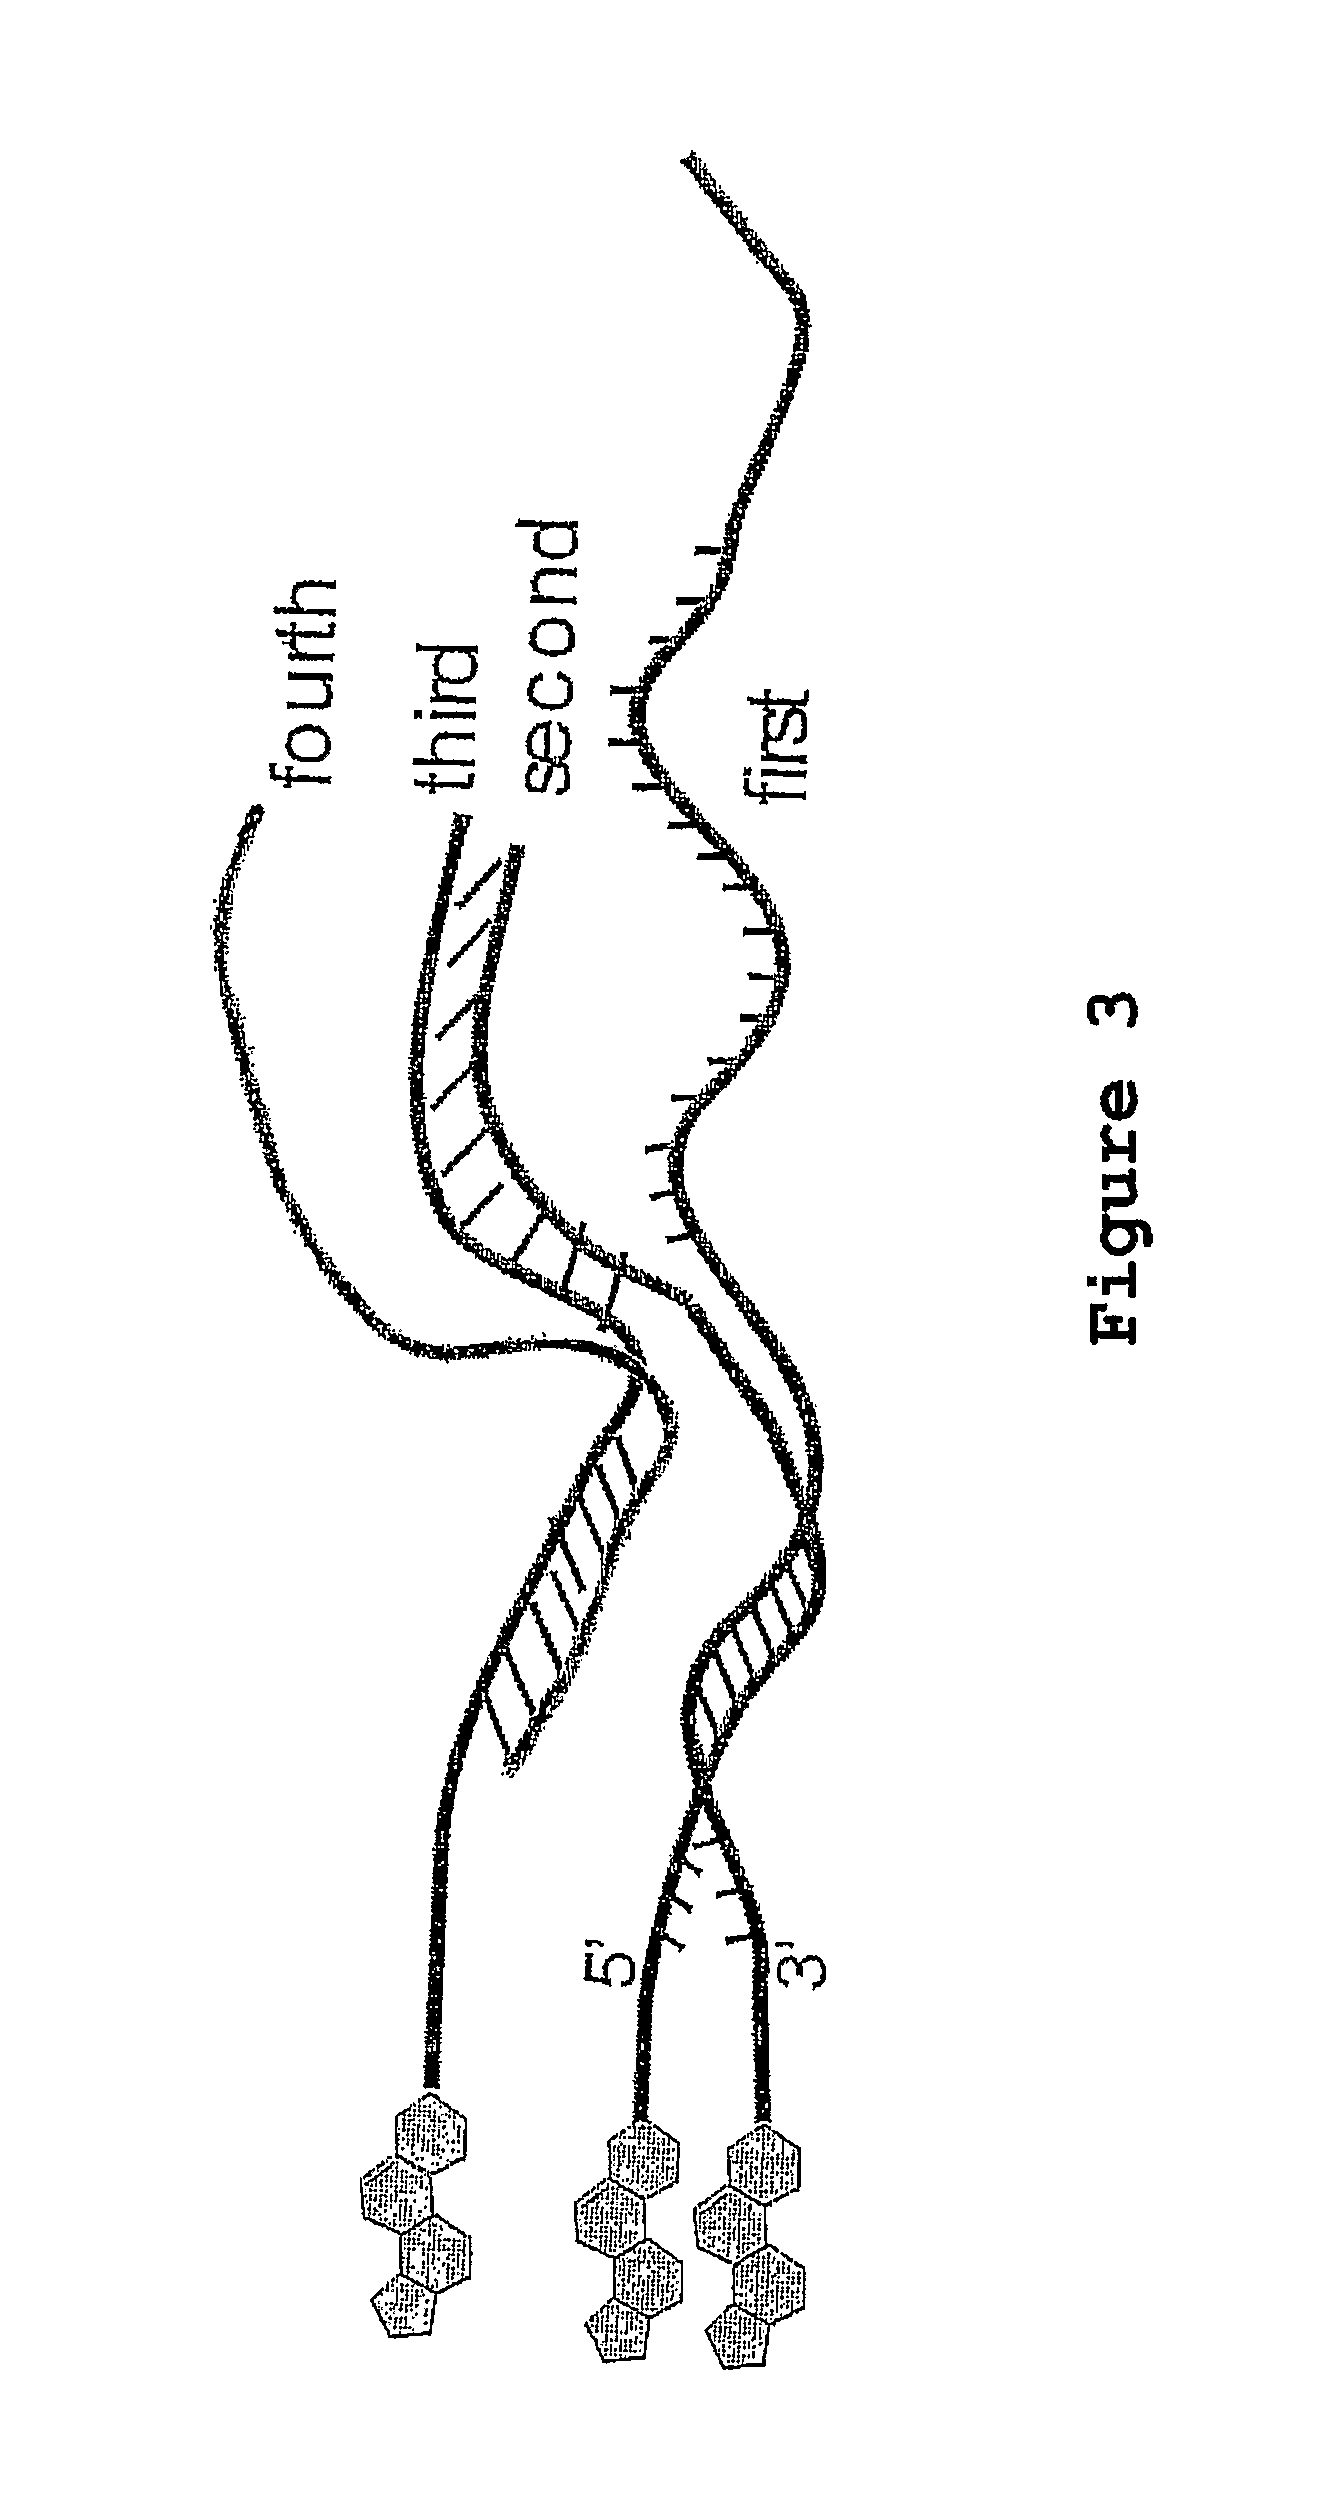 Oligonucleotides related to lipid membrane attachments